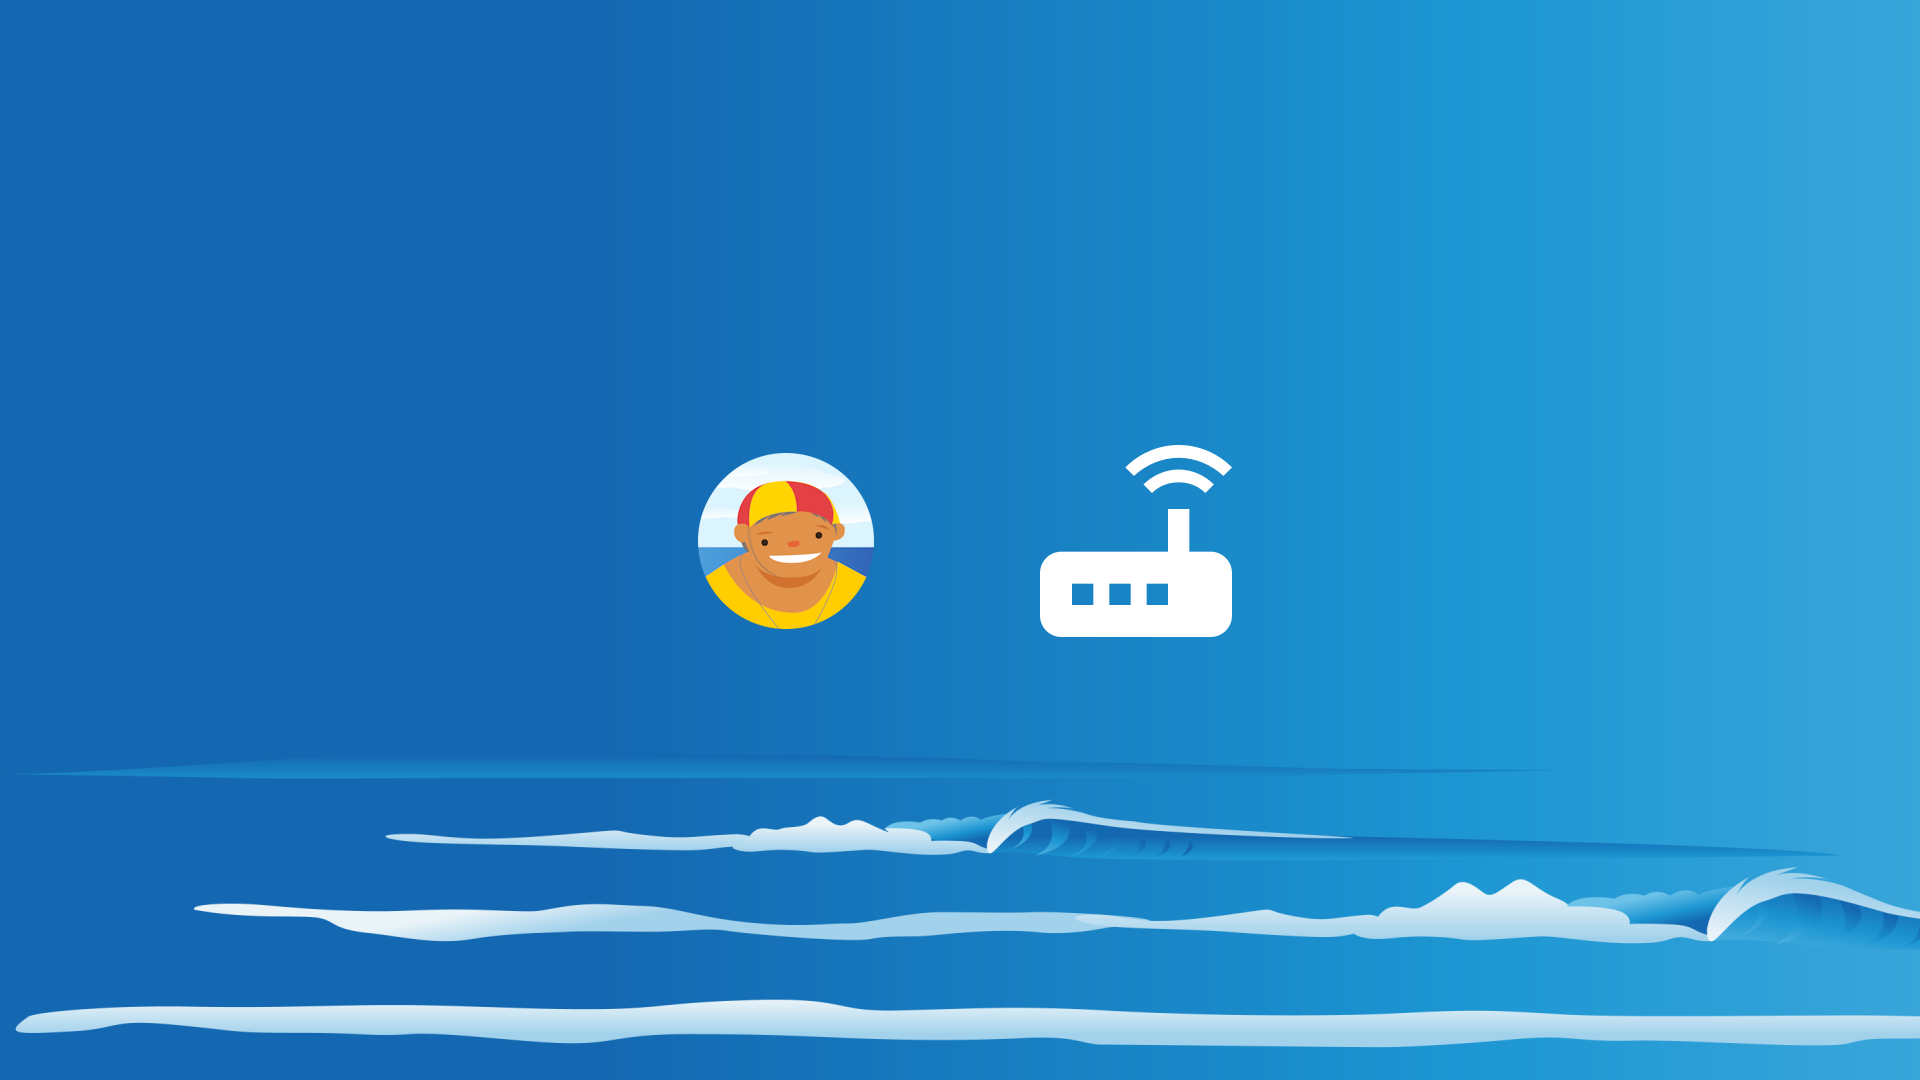 Sea background with Safe Surfer logo and wireless router icon